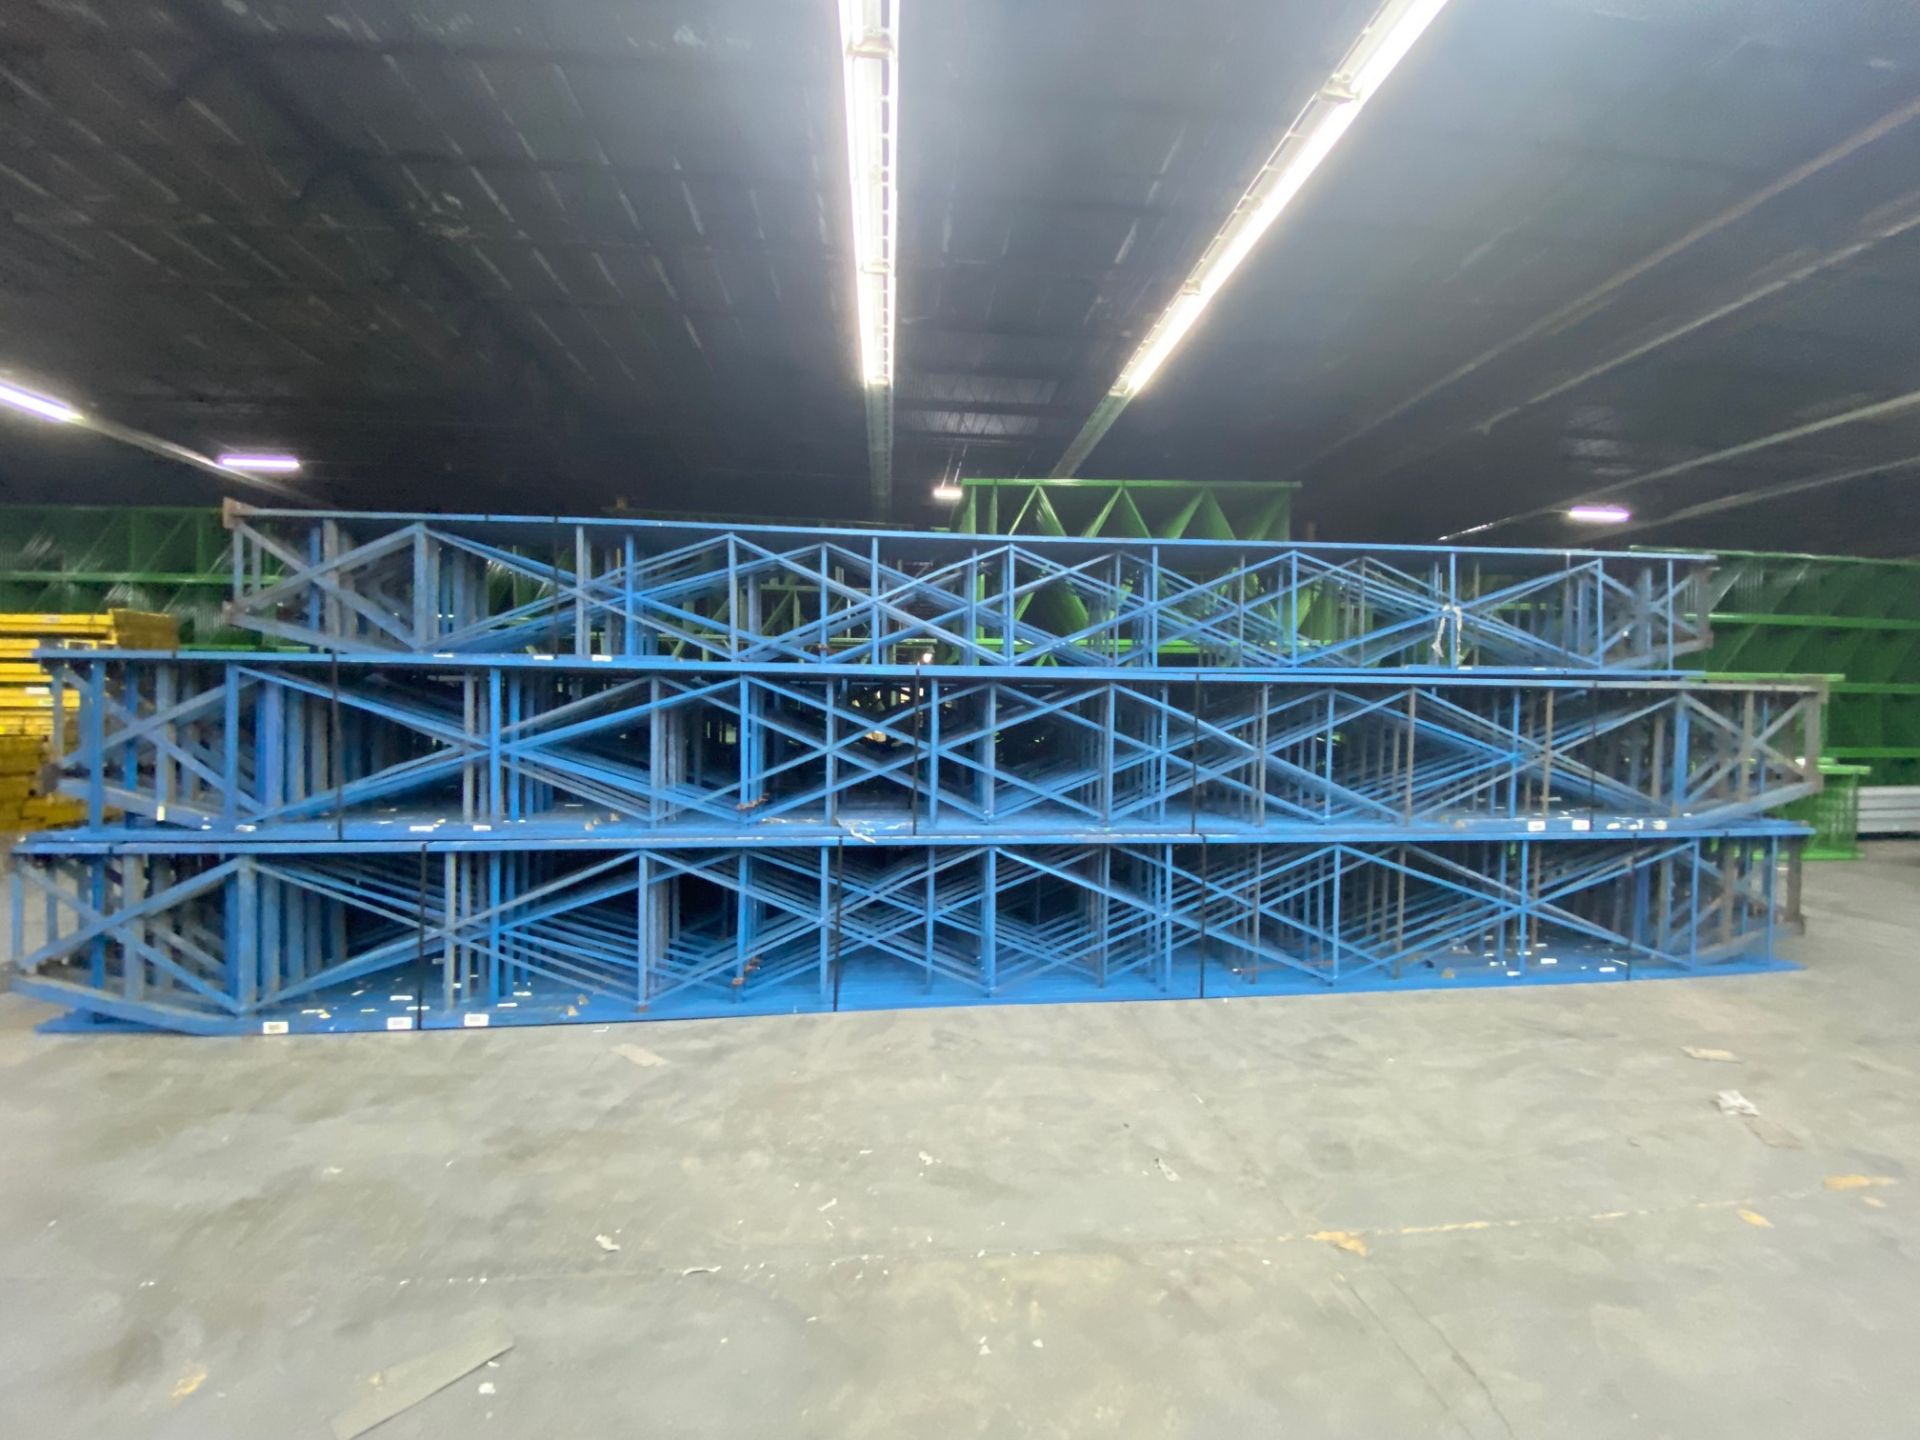 14 BAYS OF STRUCTURAL STYLE PALLET RACKS - 14 BAYS X 1 LINES X 30'H X 36"D X 112"W - Image 4 of 5